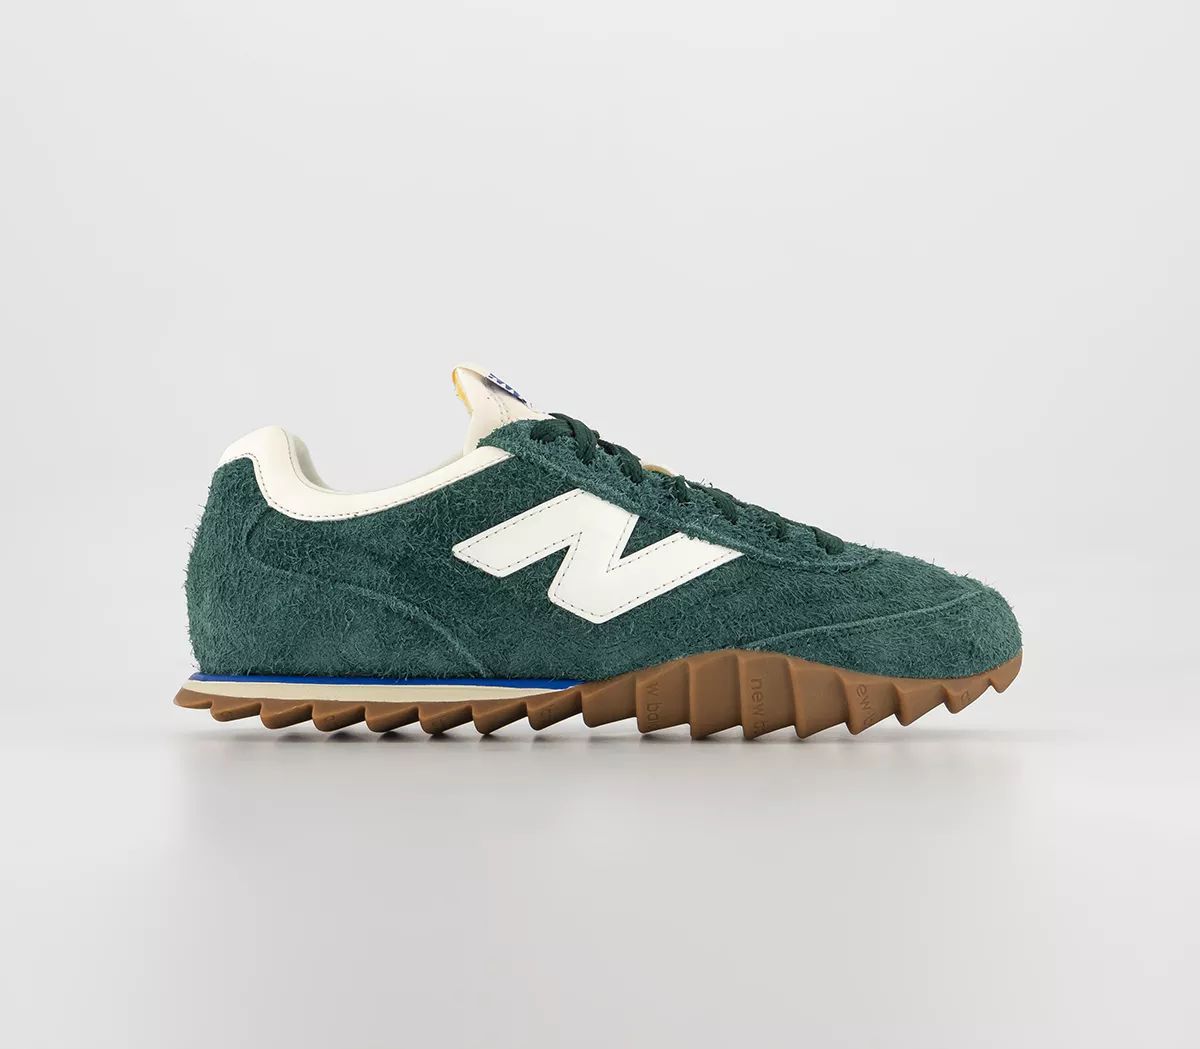 New Balance RC30 Trainers Nightwatch Green - Men's Trainers | Offspring (UK)